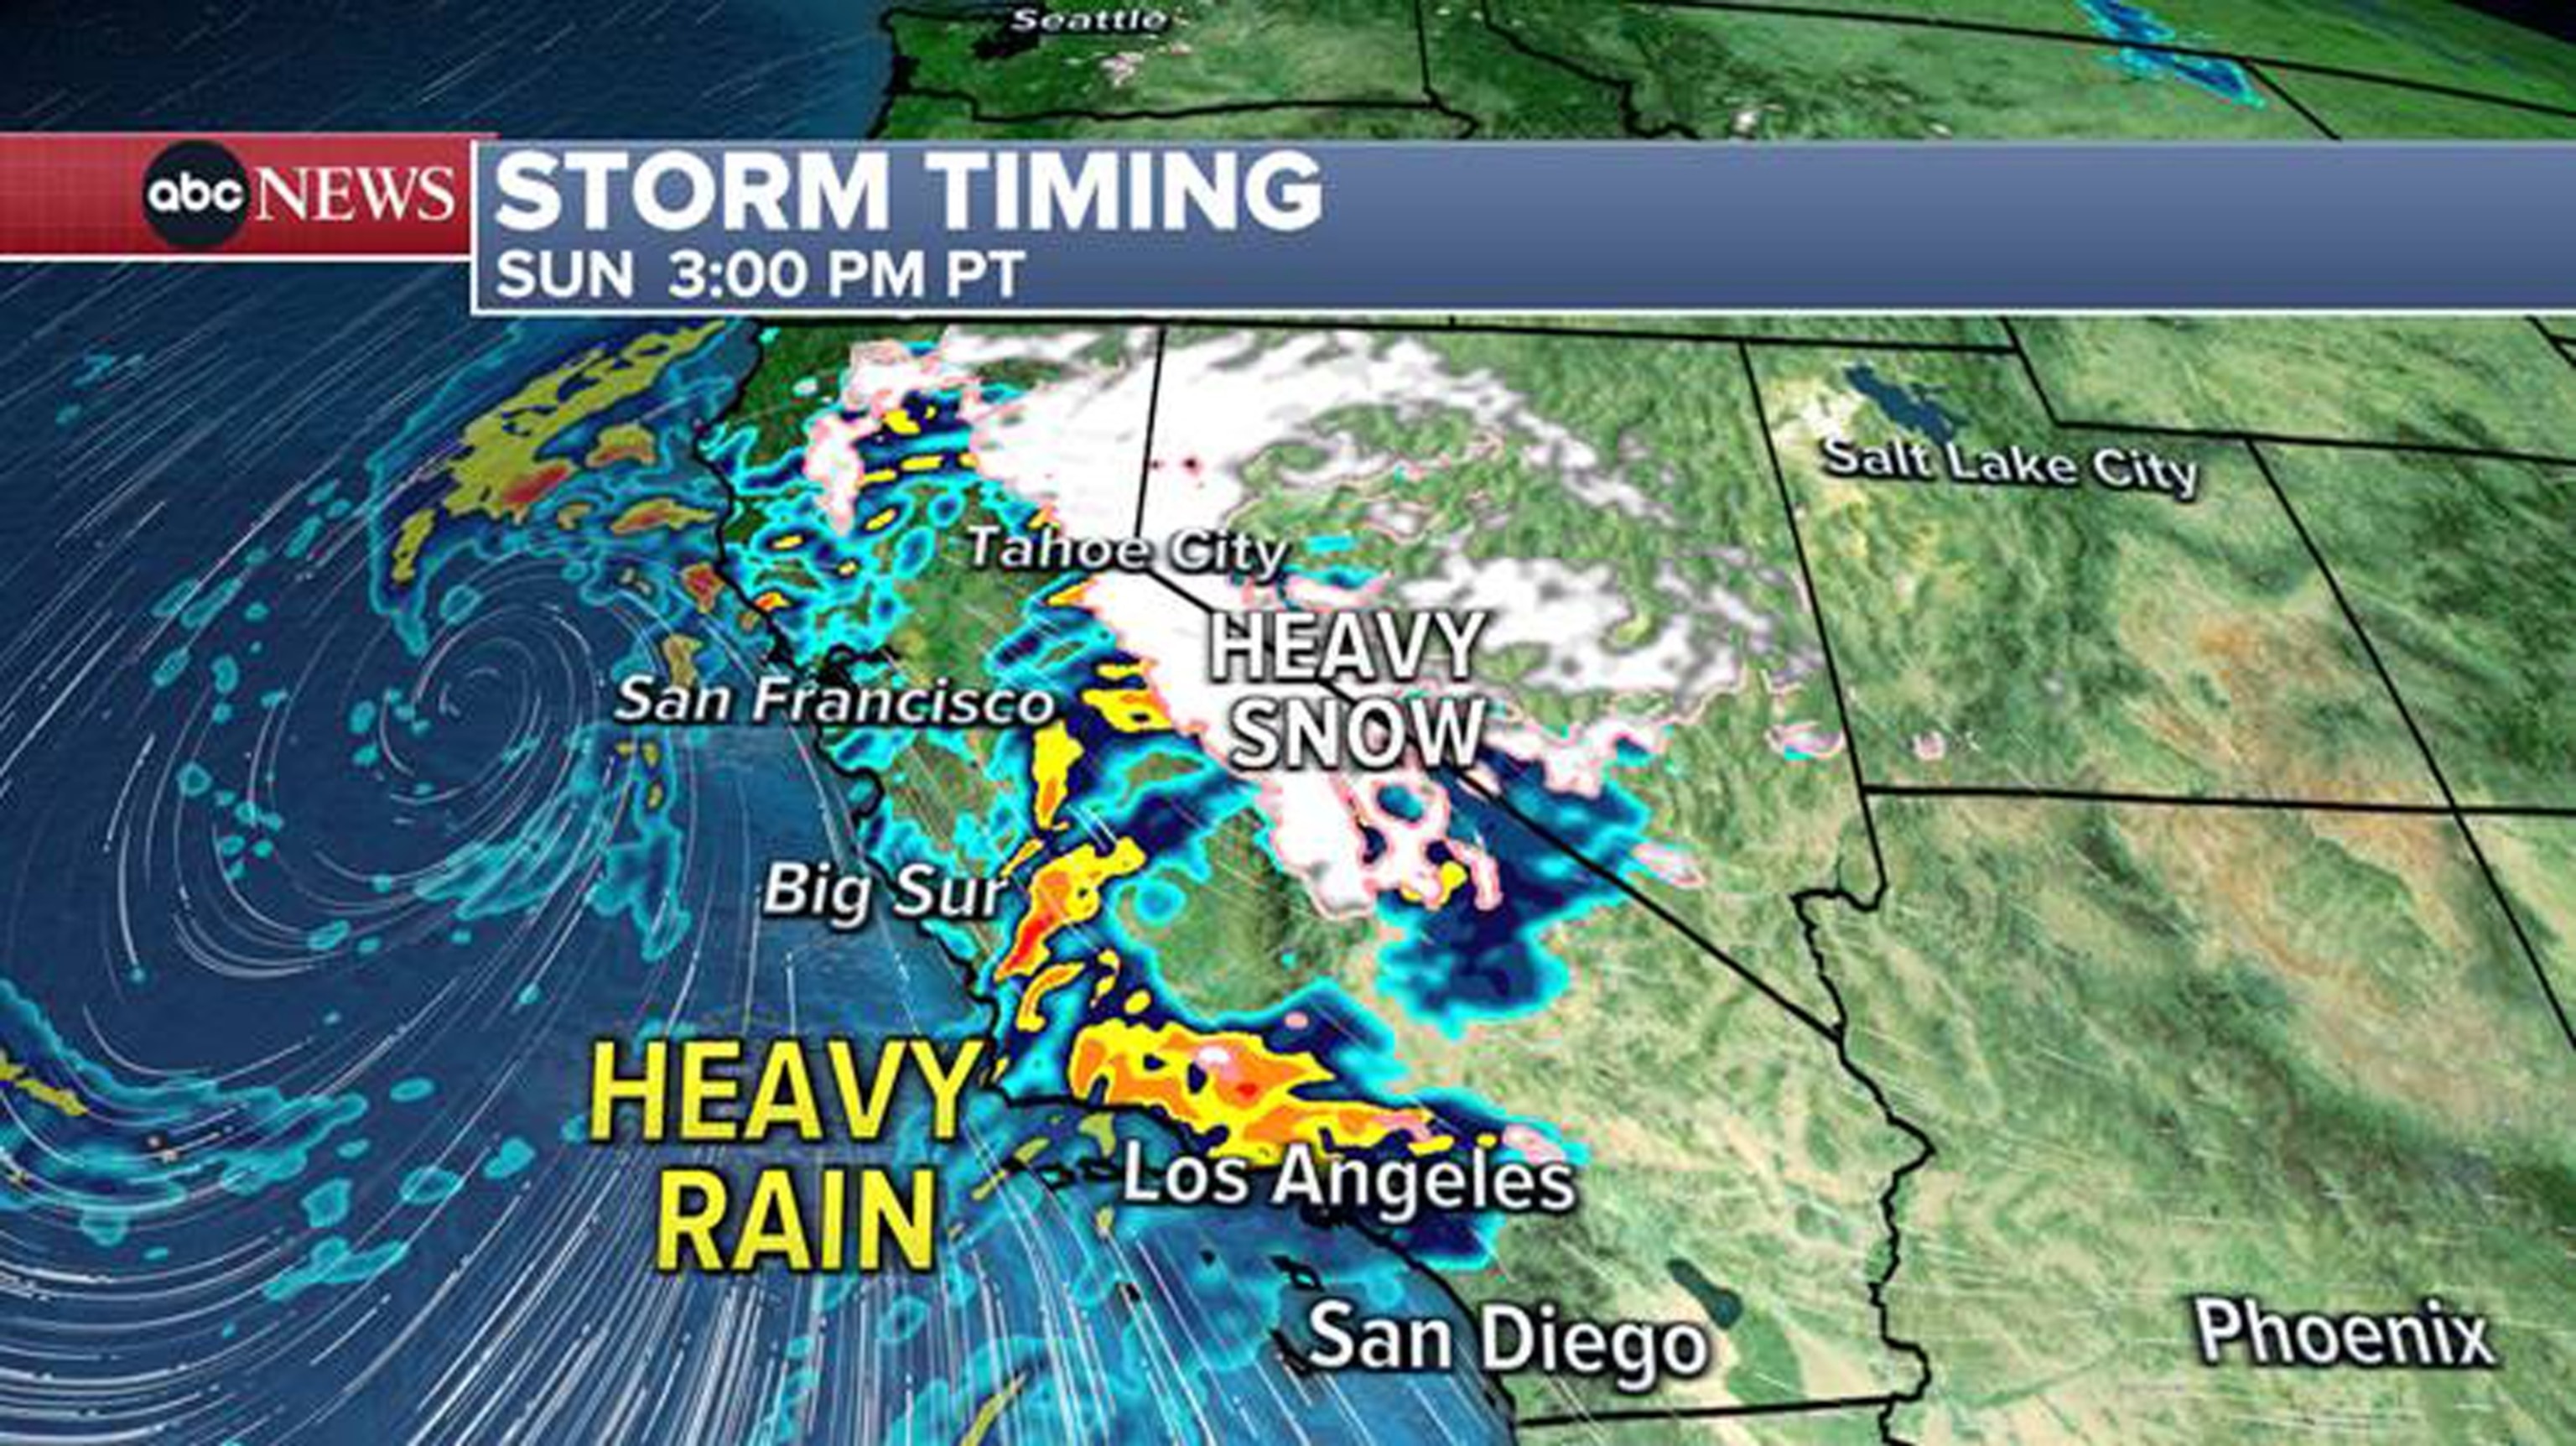 PHOTO: 3pm PT (6pm ET) heavy rain will be situated over Santa Barbara to Los Angeles with heavy snow in the mountains, and don’t forget the damaging winds.